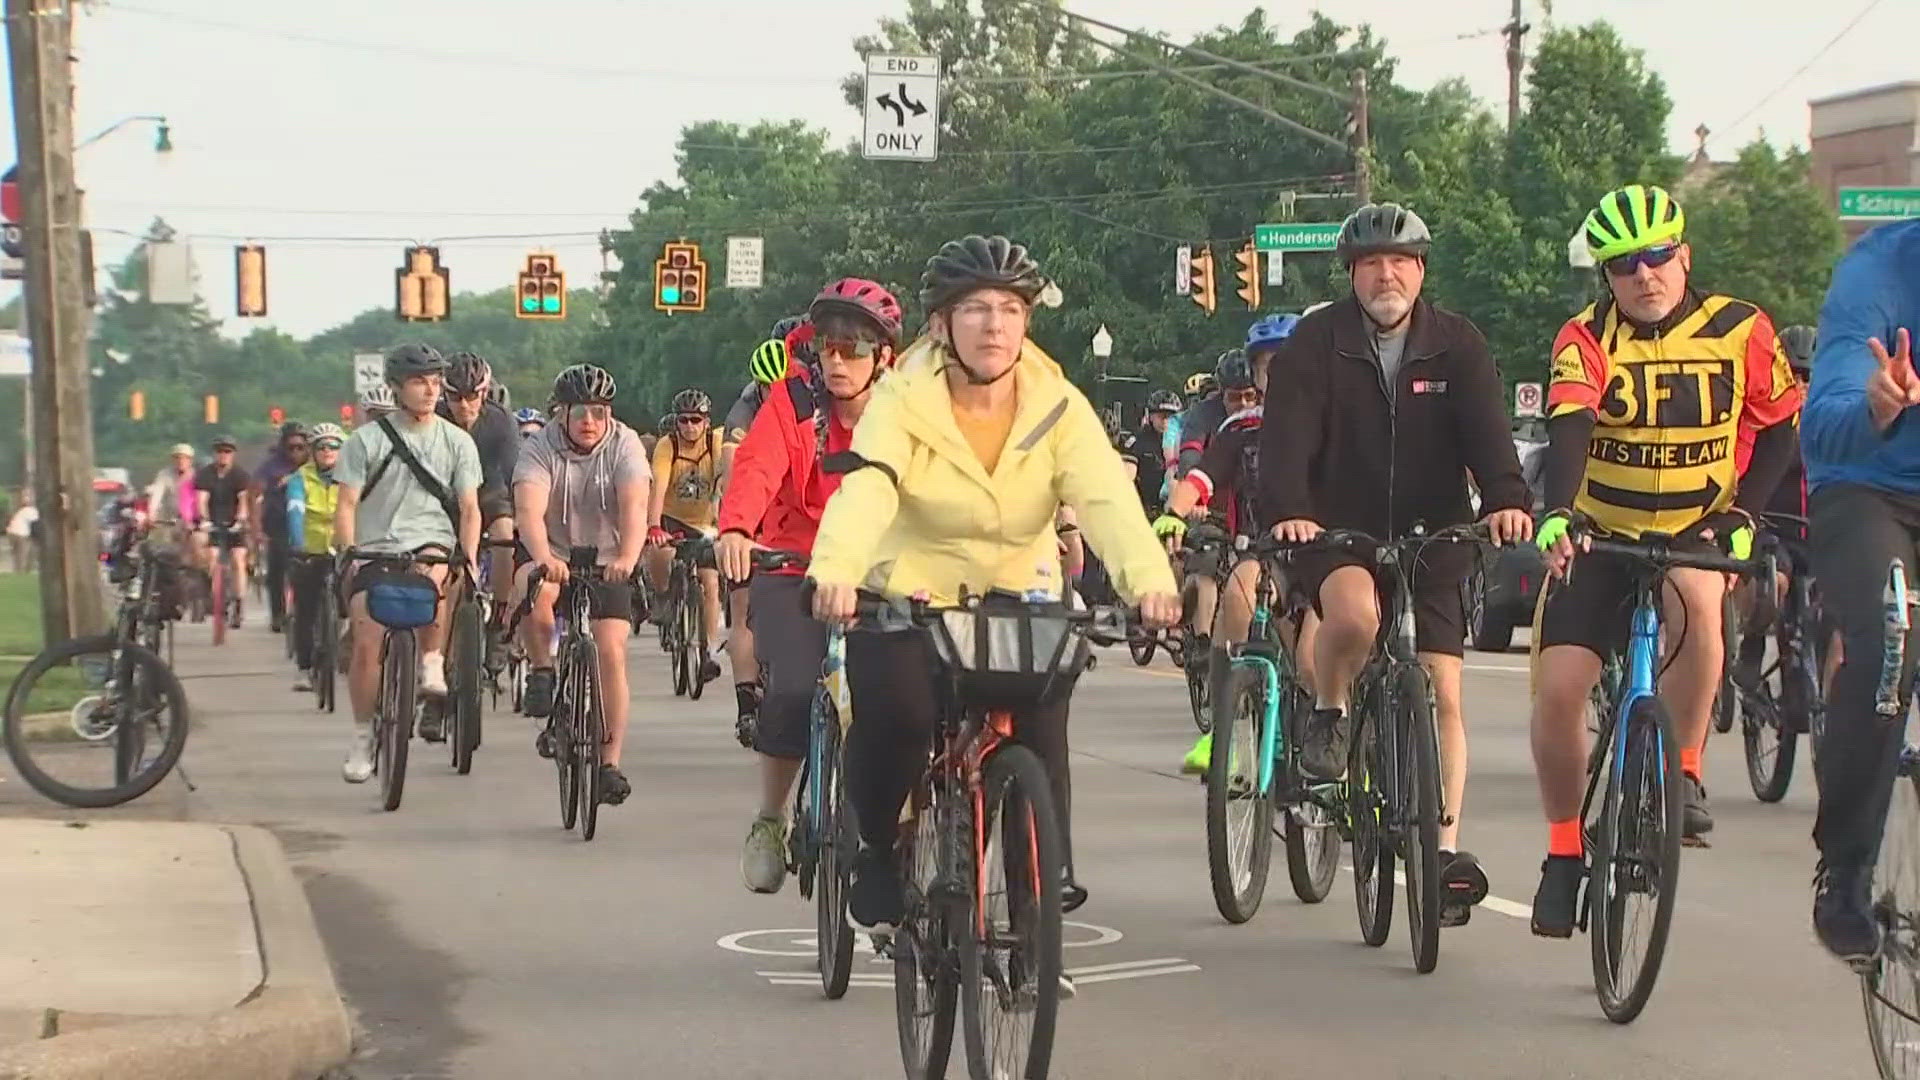 The event is held in major cities across the United States to spread awareness of the dangers cyclists face on the roads.